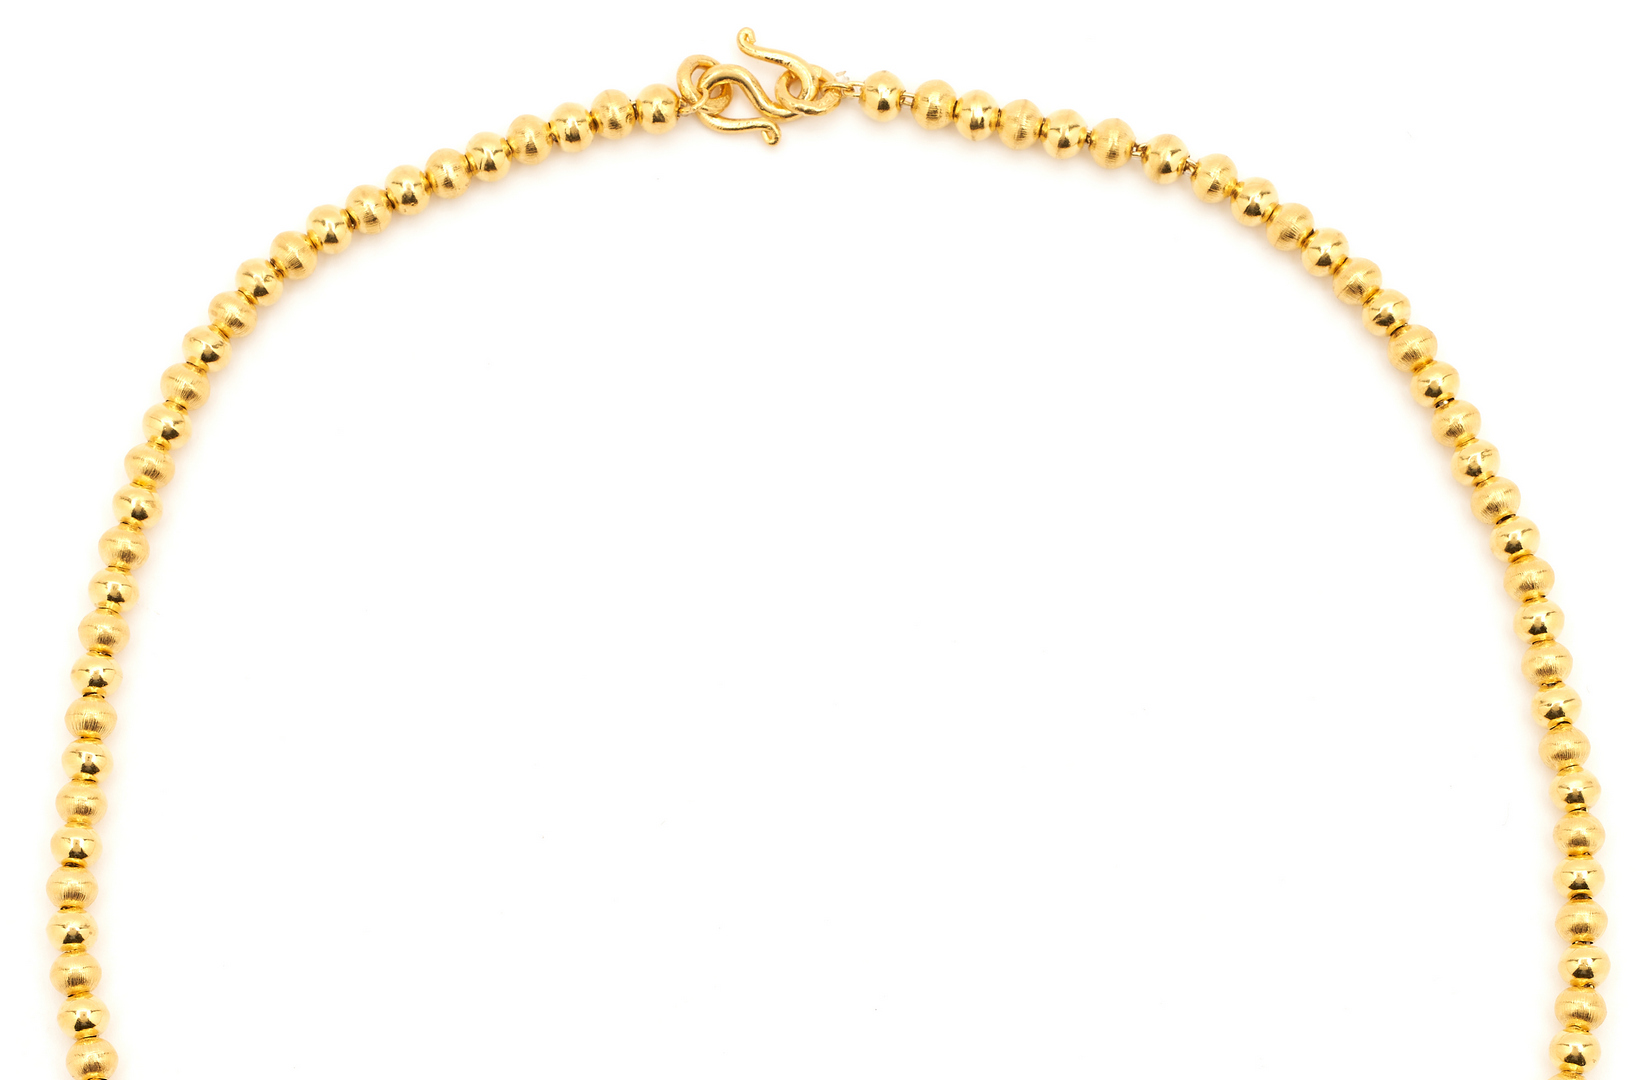 Lot 52: 22K Gold Beaded Necklace